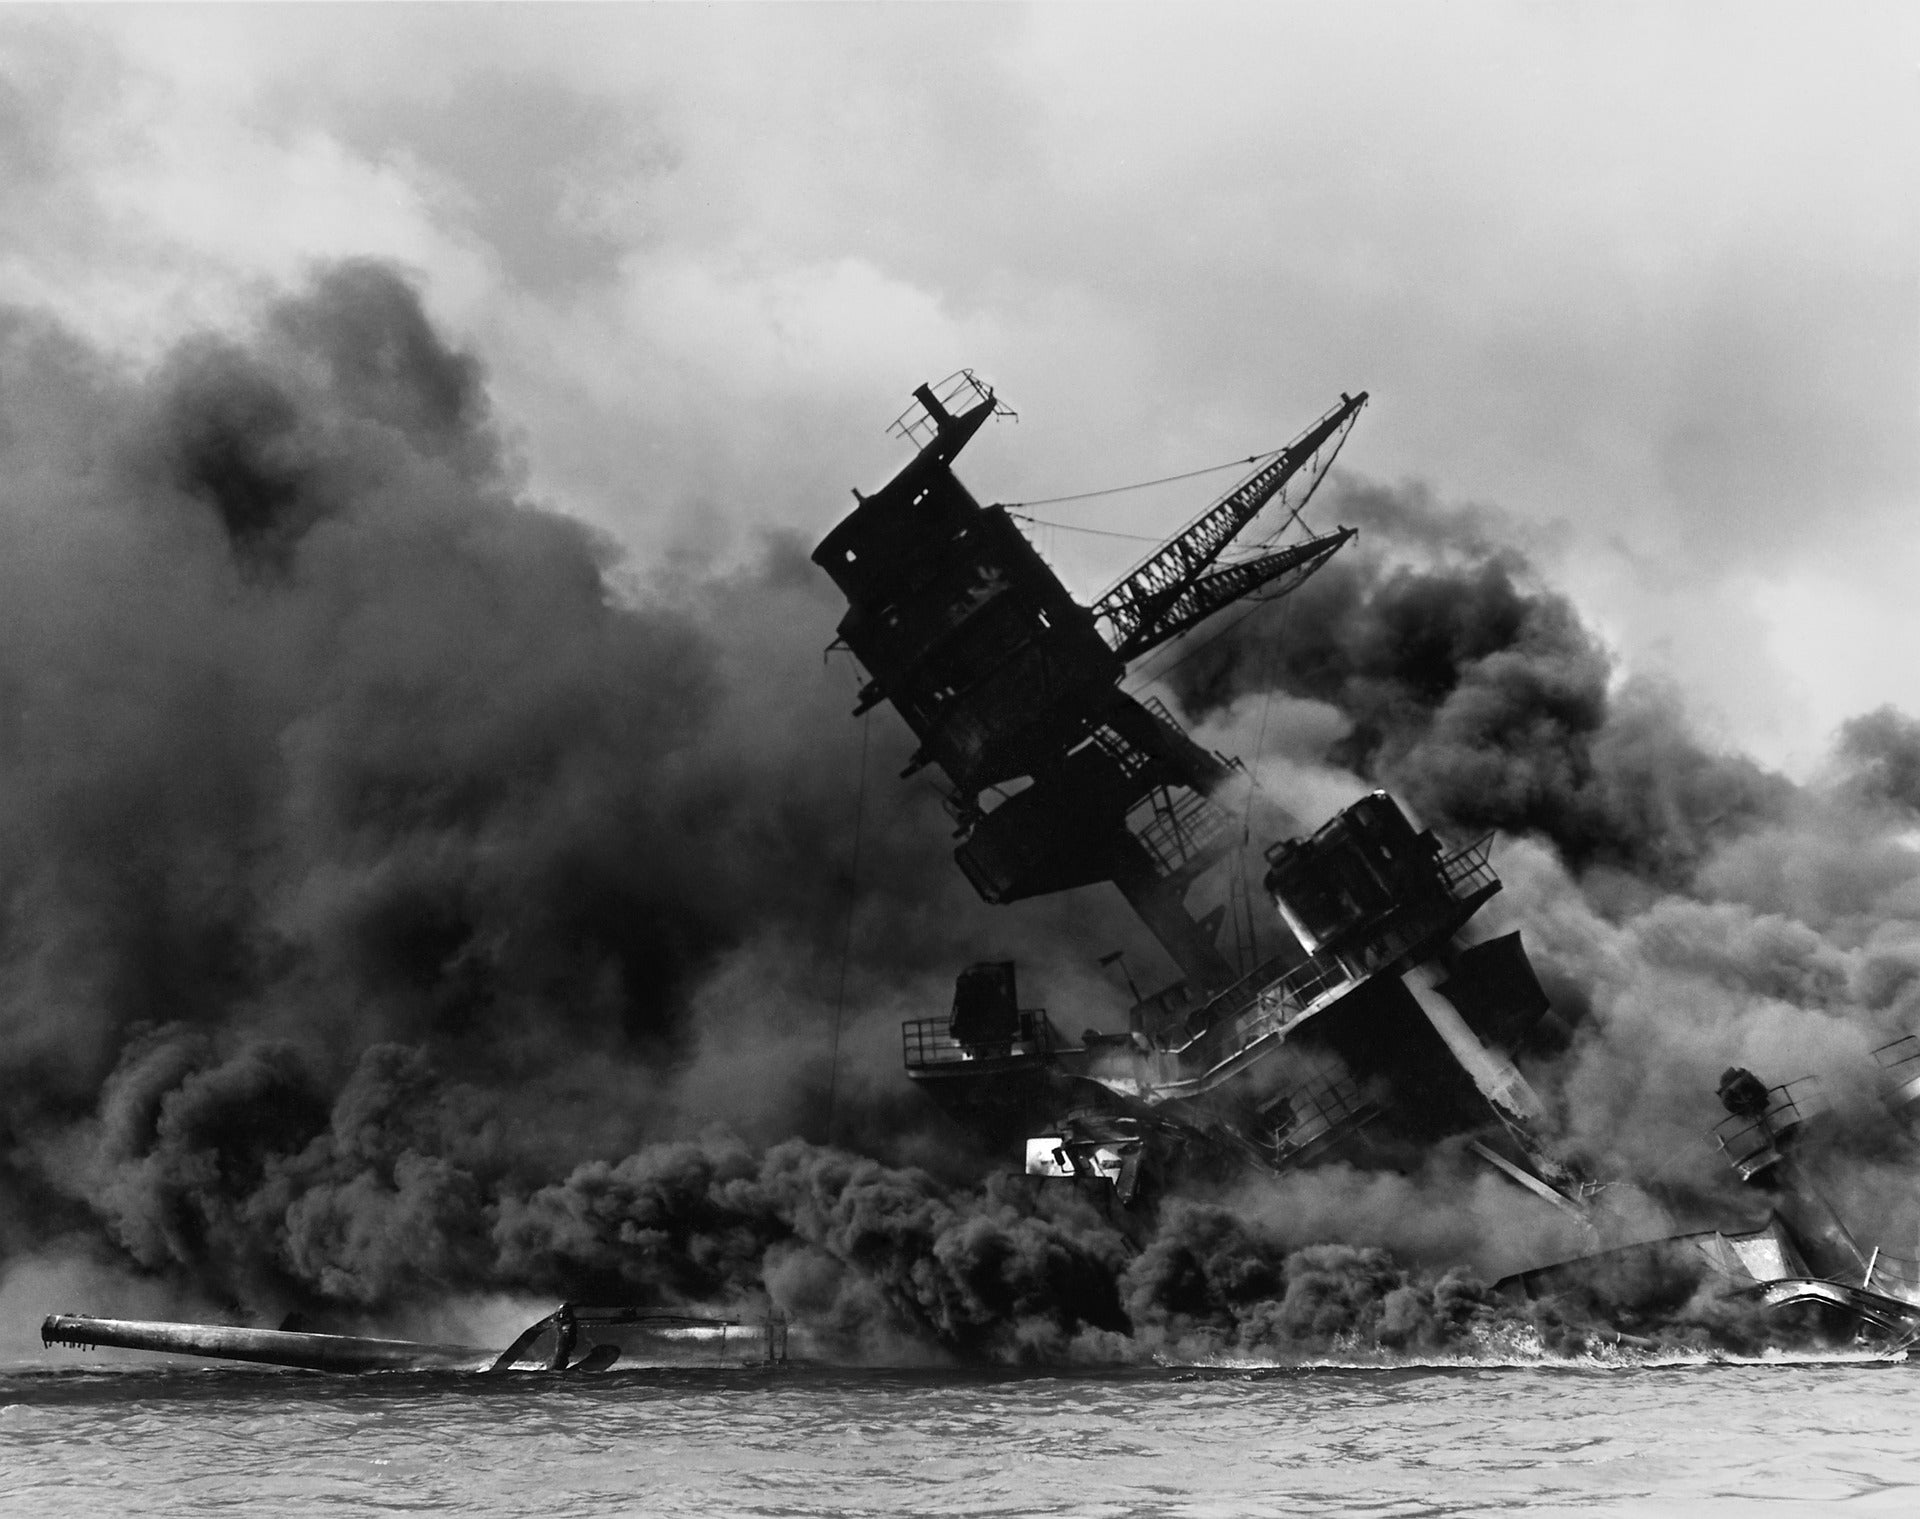 How To Teach World War II - The Attack On Pearl Harbor